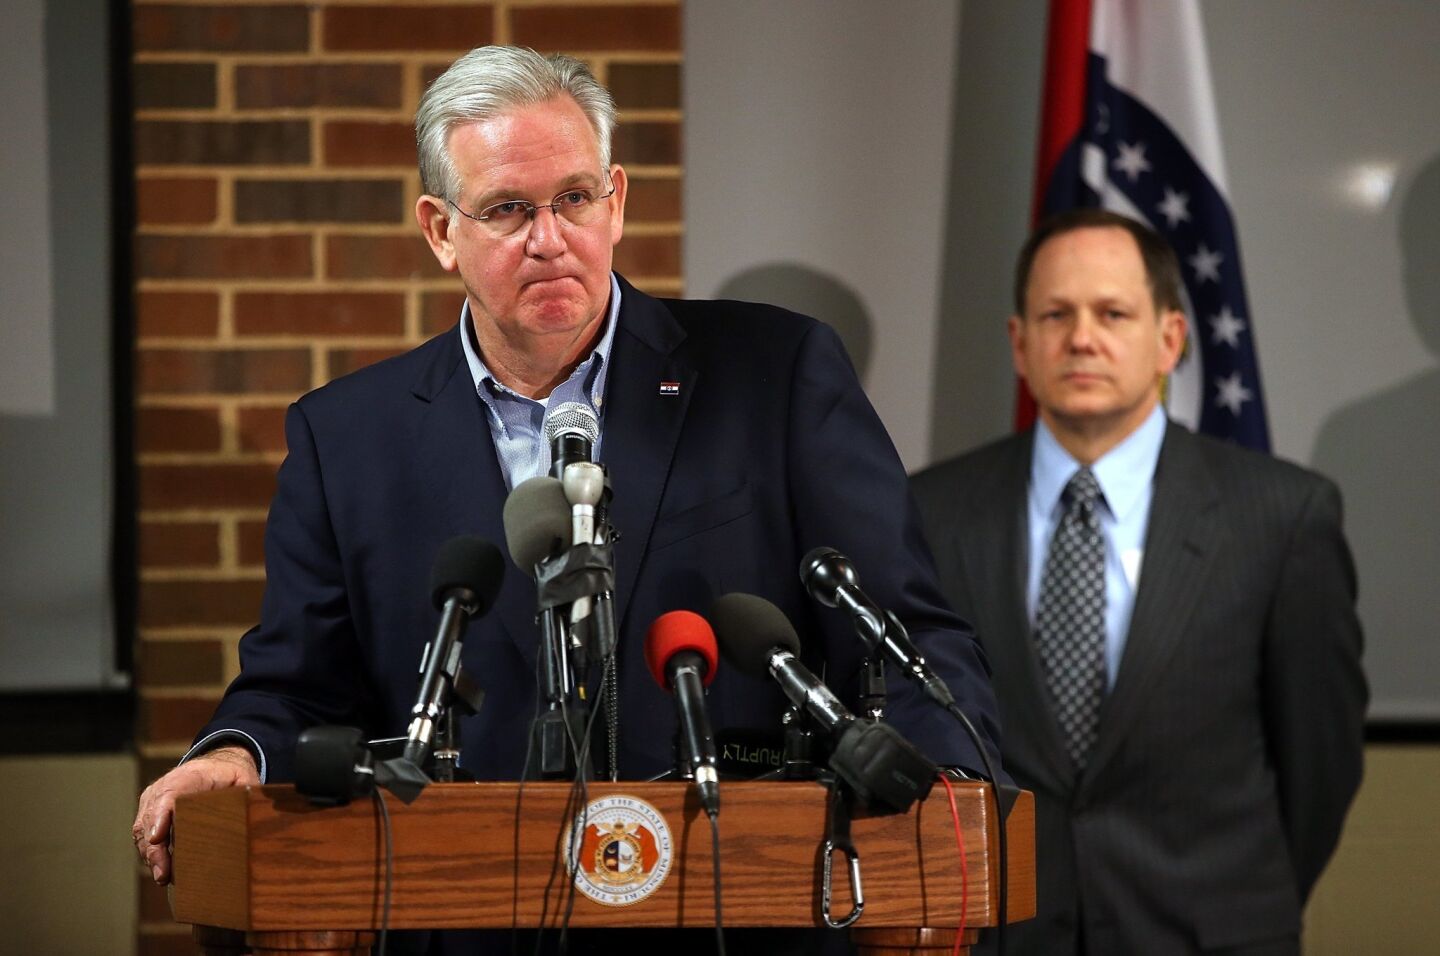 Missouri Gov. Jay Nixon speaks during a news conference as St. Louis Mayor Francis Slay looks on at the University of Missouri, St. Louis. Nixon asked for calm in the community amid the news that a grand jury has reached a decision on whether to charge Ferguson Officer Darren Wilson.